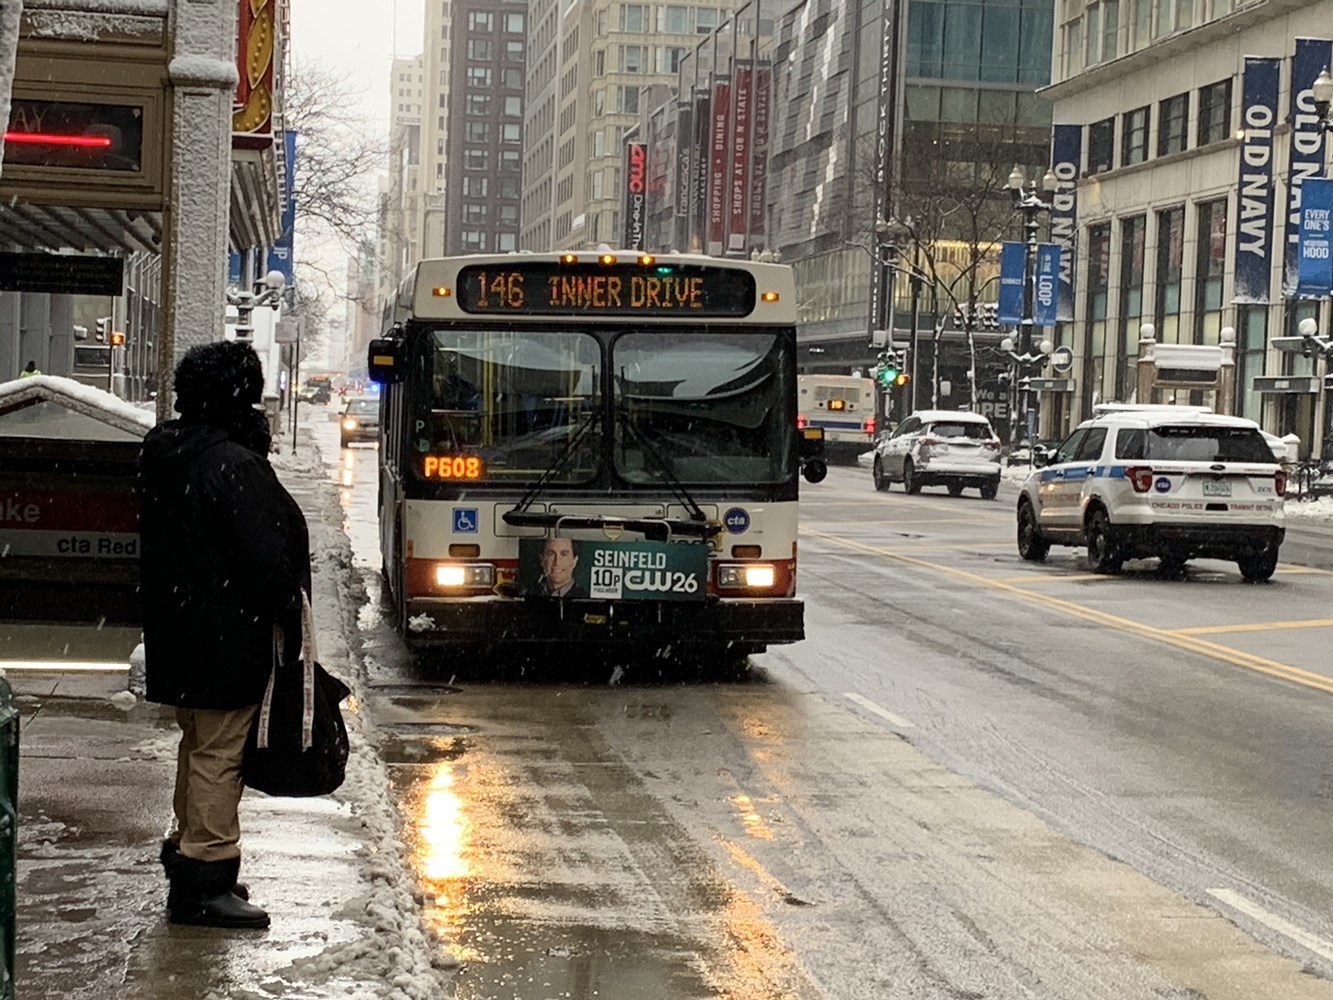 Customer at a bus stop cleared of snow outside the State/Lake Red Line subway entrance. 